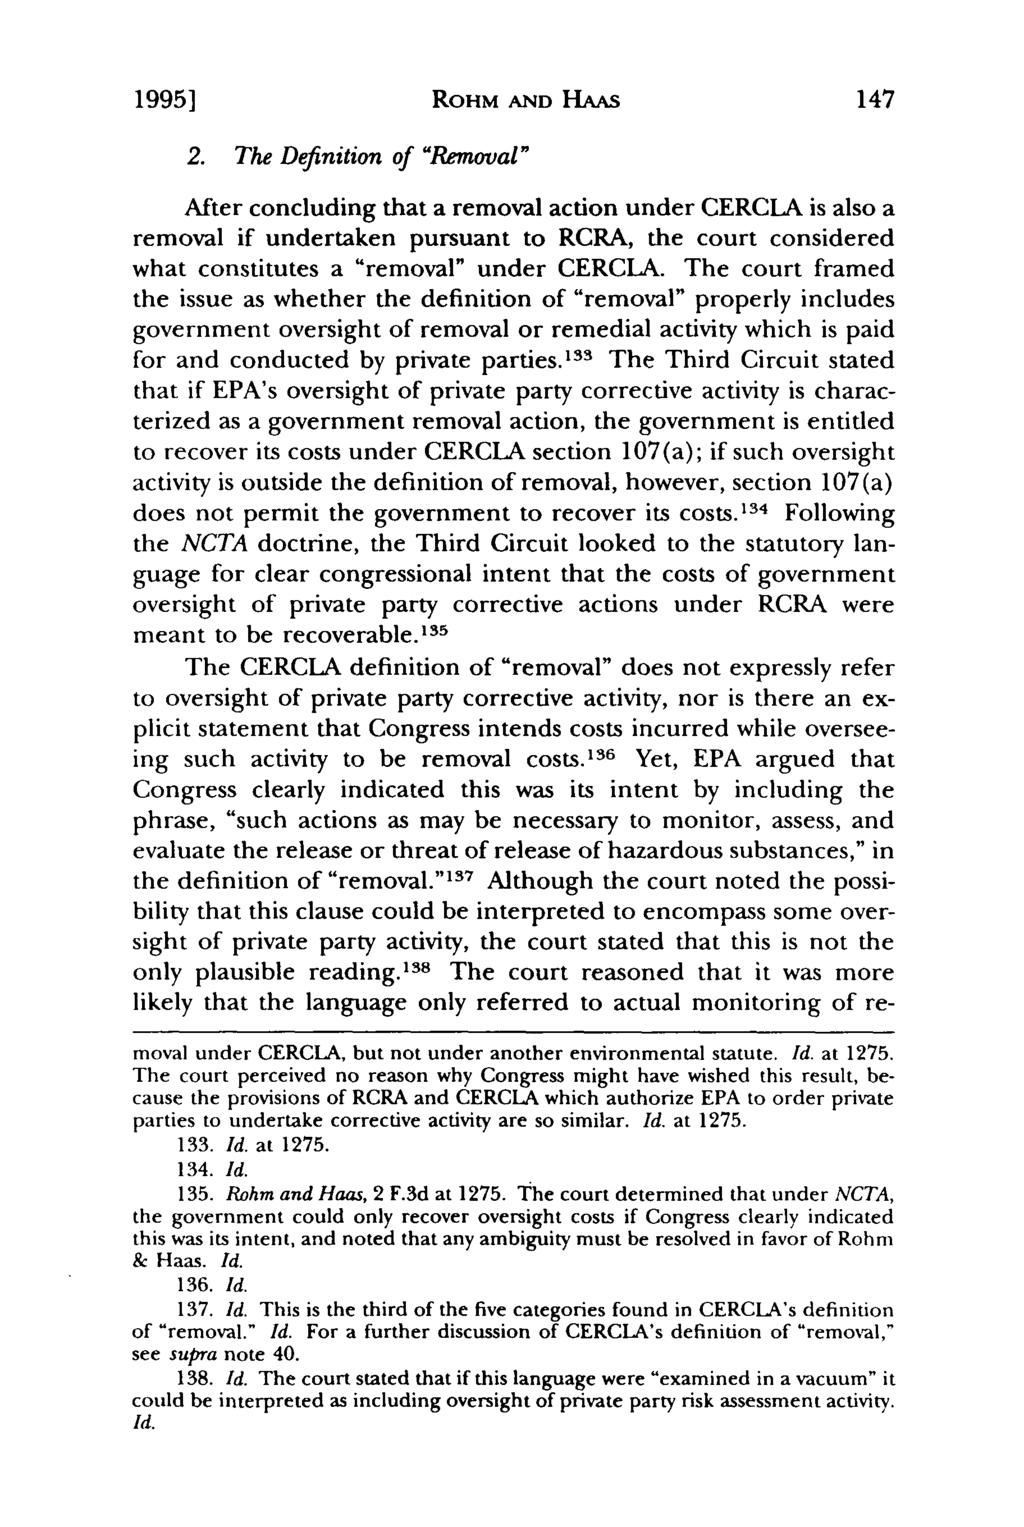 19951 Aberbach: Recoverability of Government Oversight Costs under CERCLA Section ROHM AND HAAS 2.